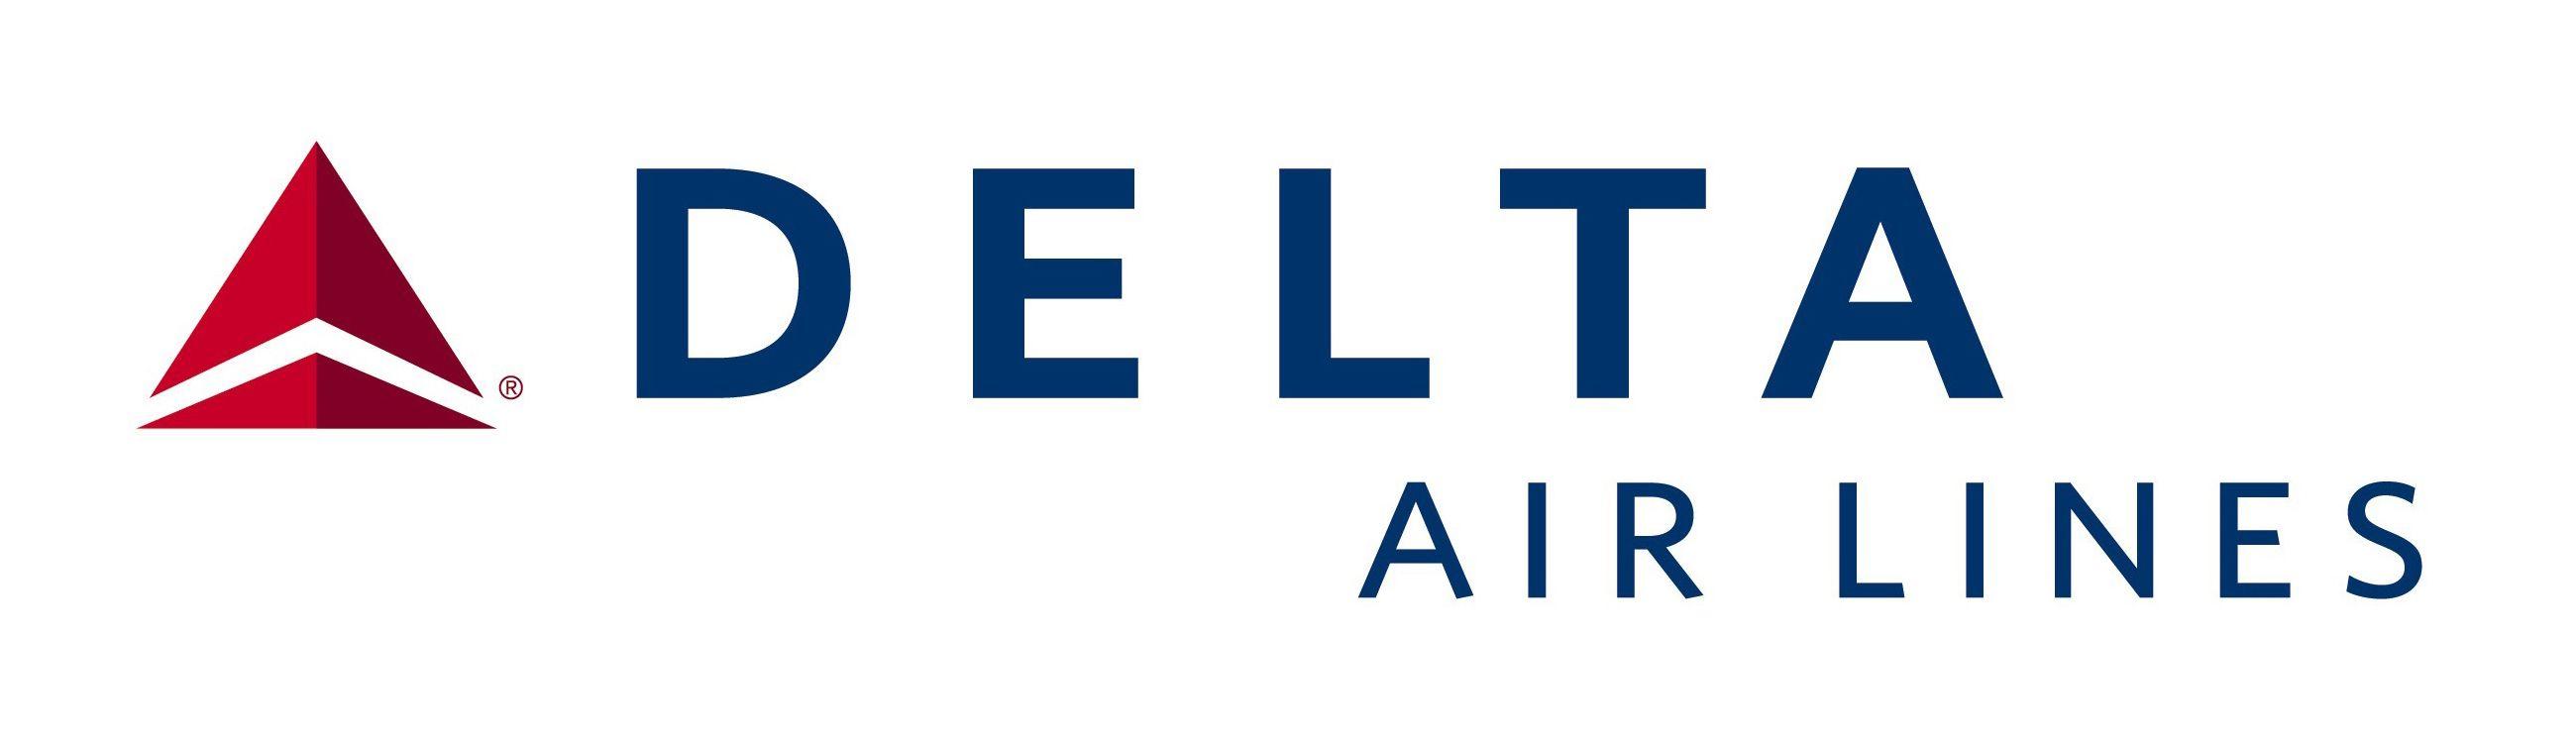 Delta Air Lines Logo - Delta Air Lines Logo, Delta Air Lines Symbol, History and Evolution